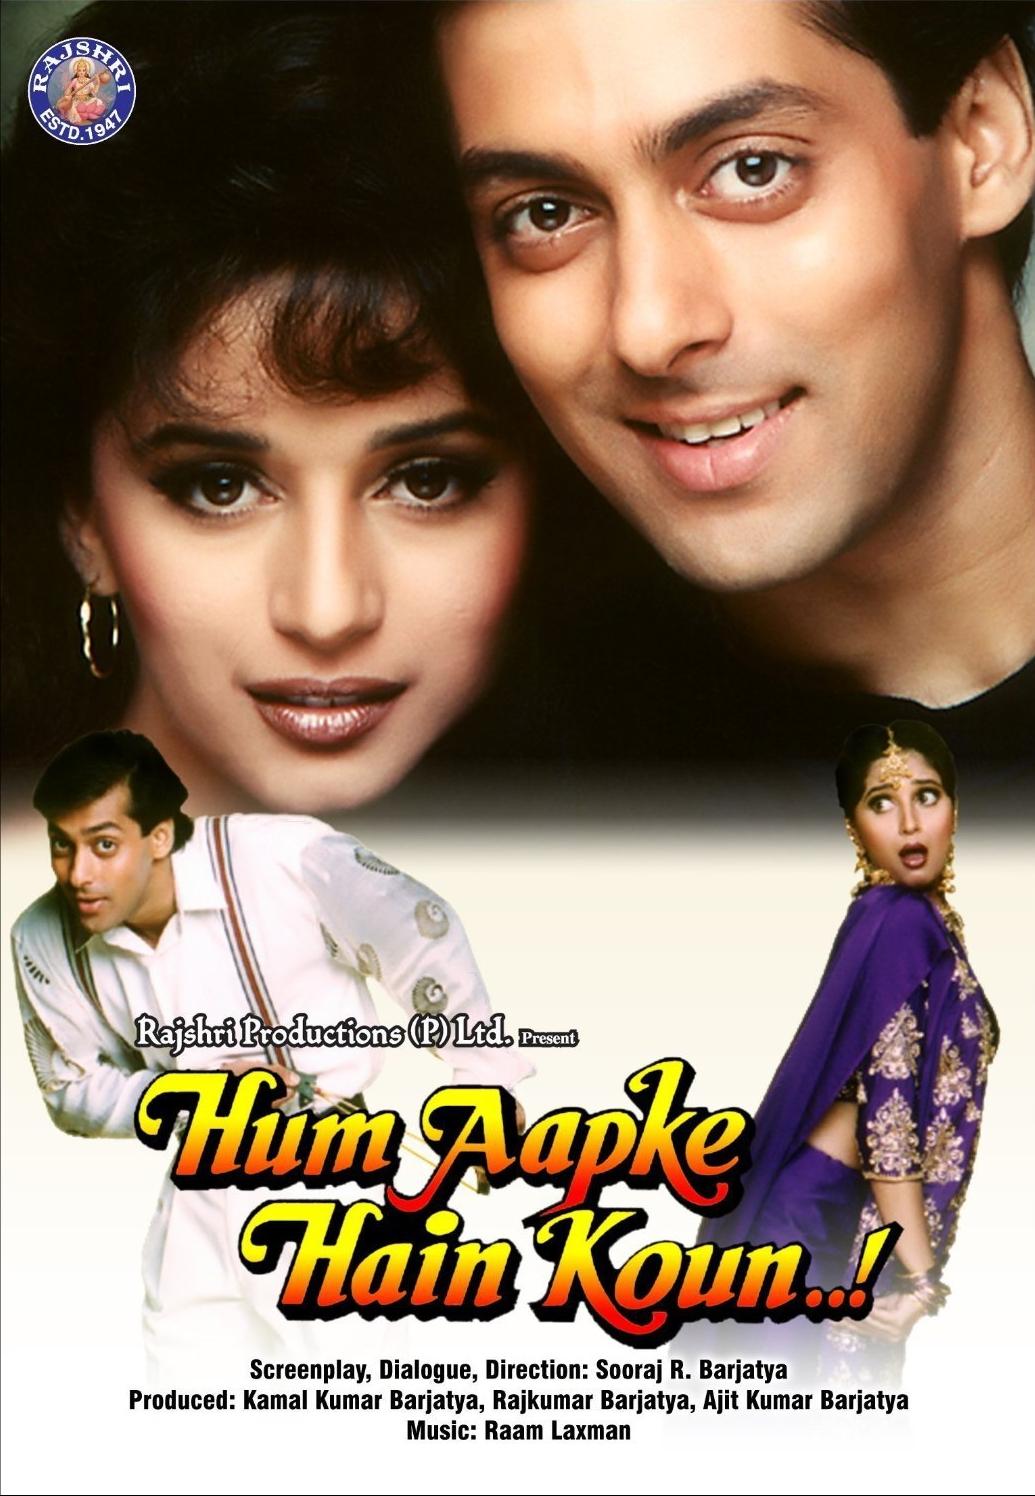 Hum Aapke Hain Koun... narrates the tale of Prem (Salman Khan) and Nisha (Madhuri Dixit), whose paths intertwine as they convene for the first time during the preparations for the wedding of Prem's older brother, Rajesh (Mohnish Behl), and Nisha's elder sister, Pooja (Renuka Shahane).